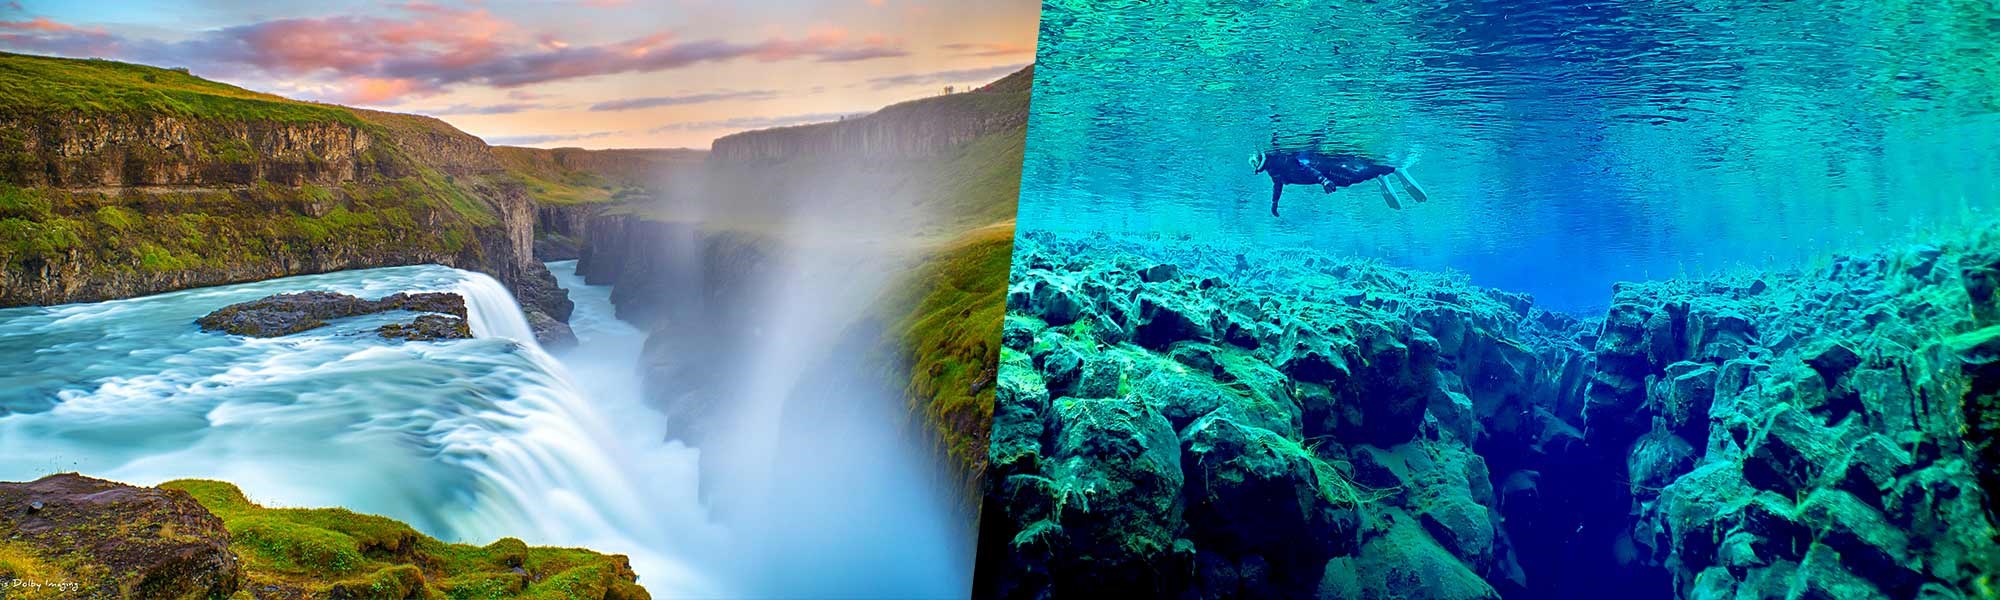 collage of waterfall and snorkeling in Iceland